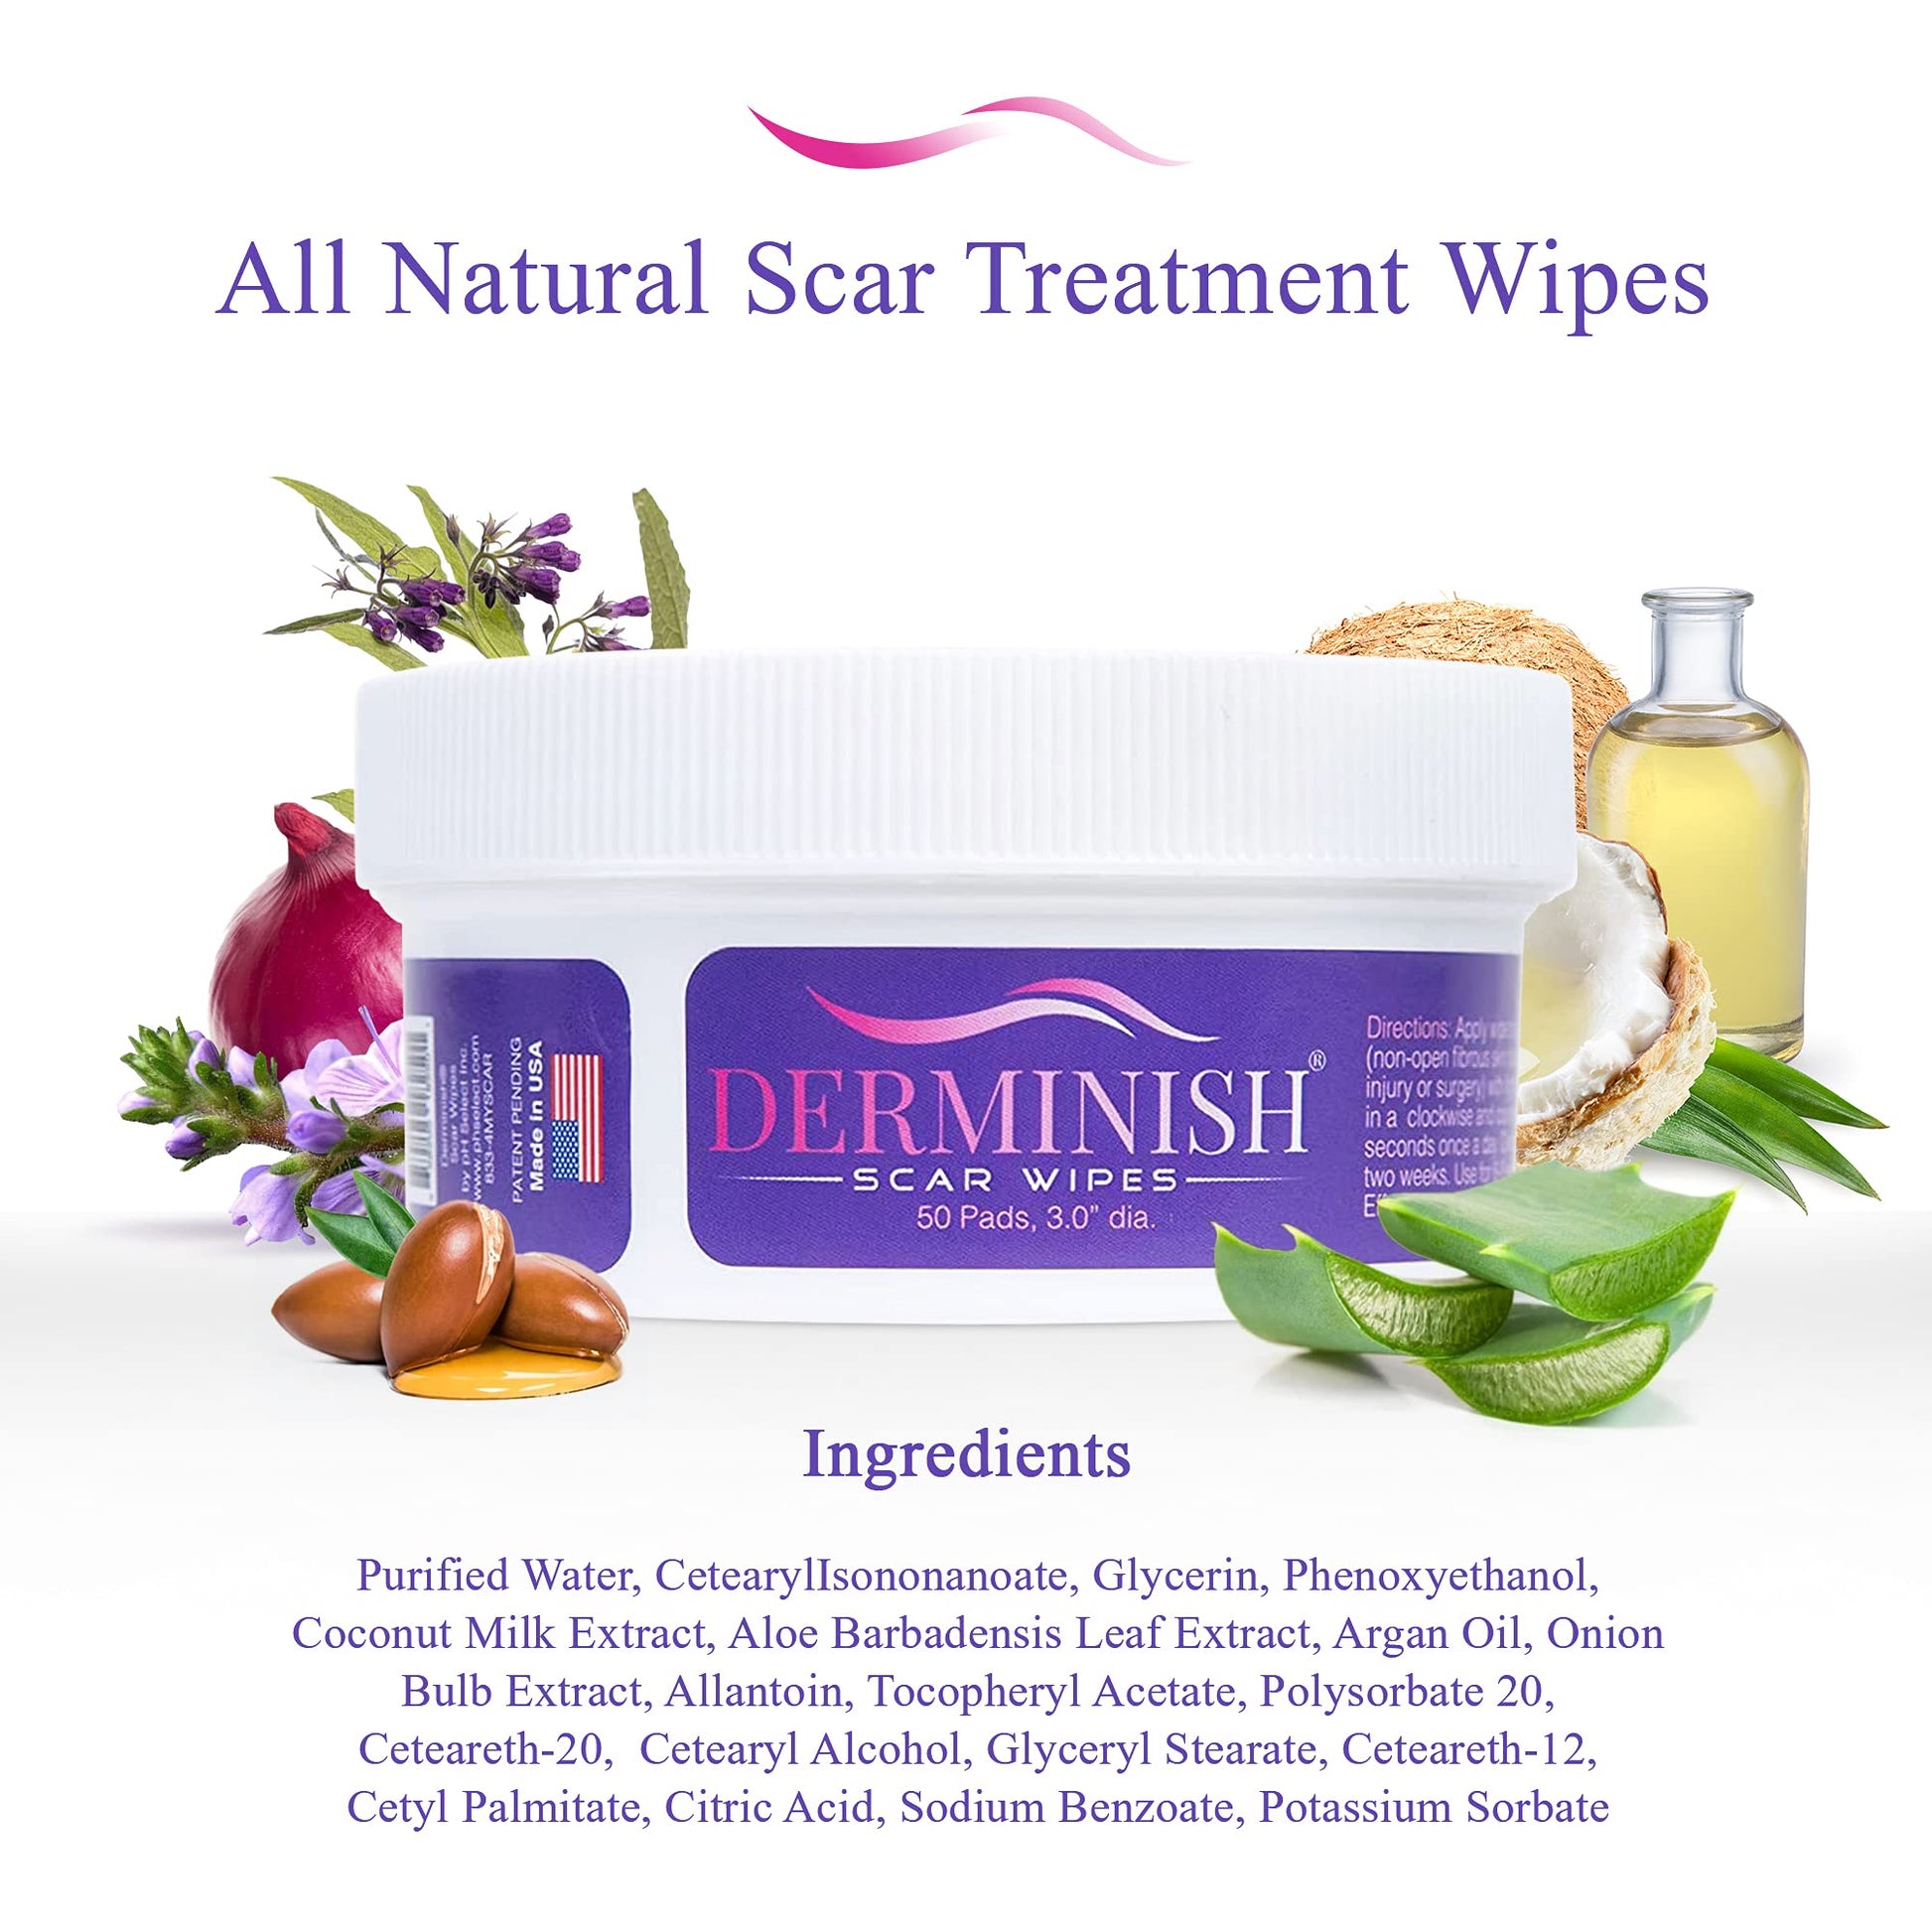 All Natural Scar Treatment Wipes. Some ingredients it contains is allantoin, onion bulb extract, argan oil, coconut milk extract and aloe barbadensis leaf extract.